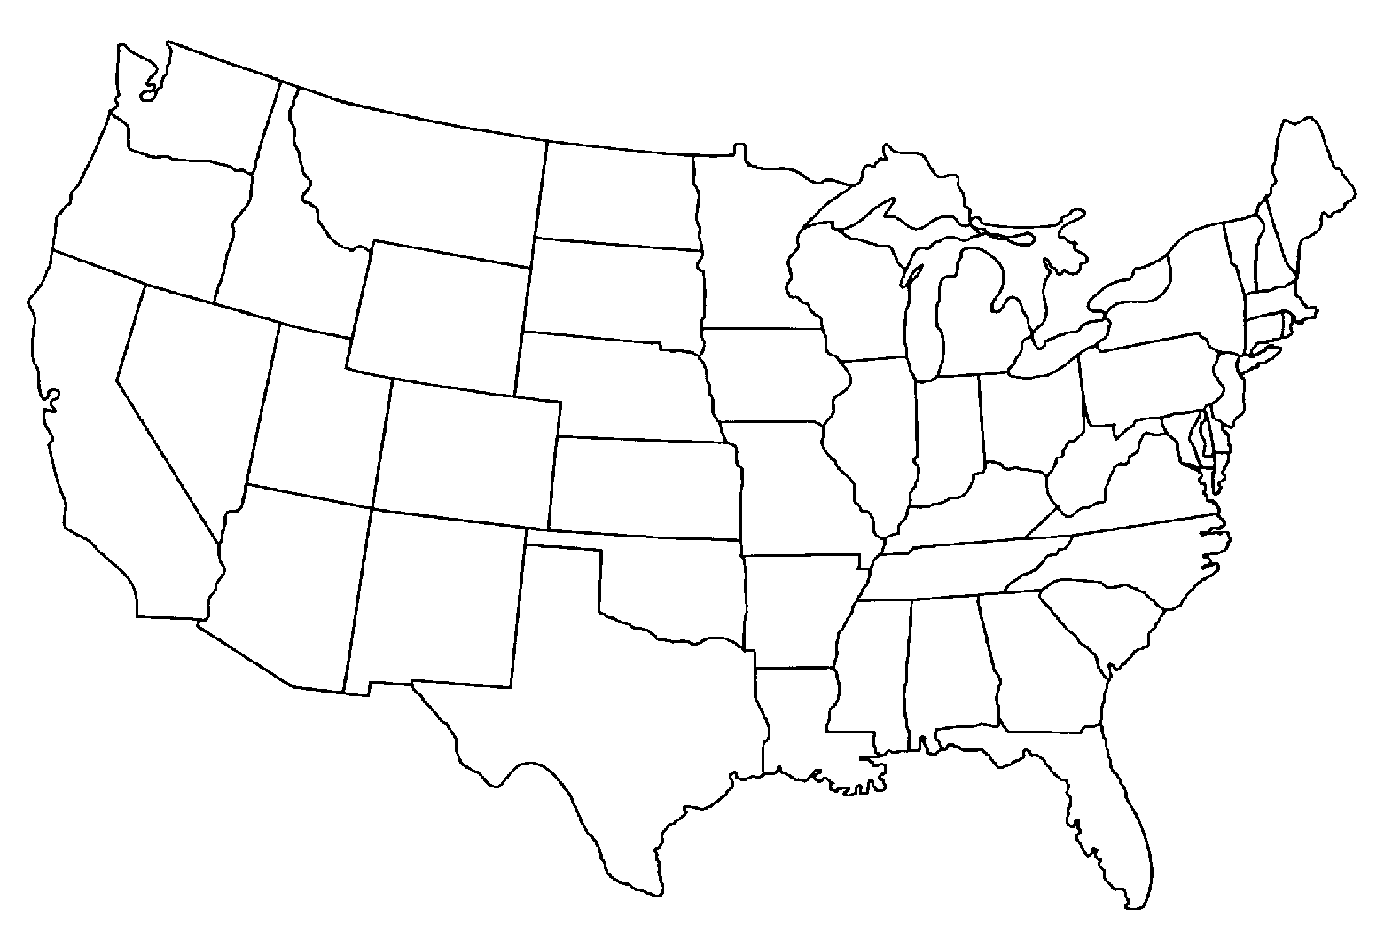 Blank United States Map Coloring Page - Get Coloring Pages